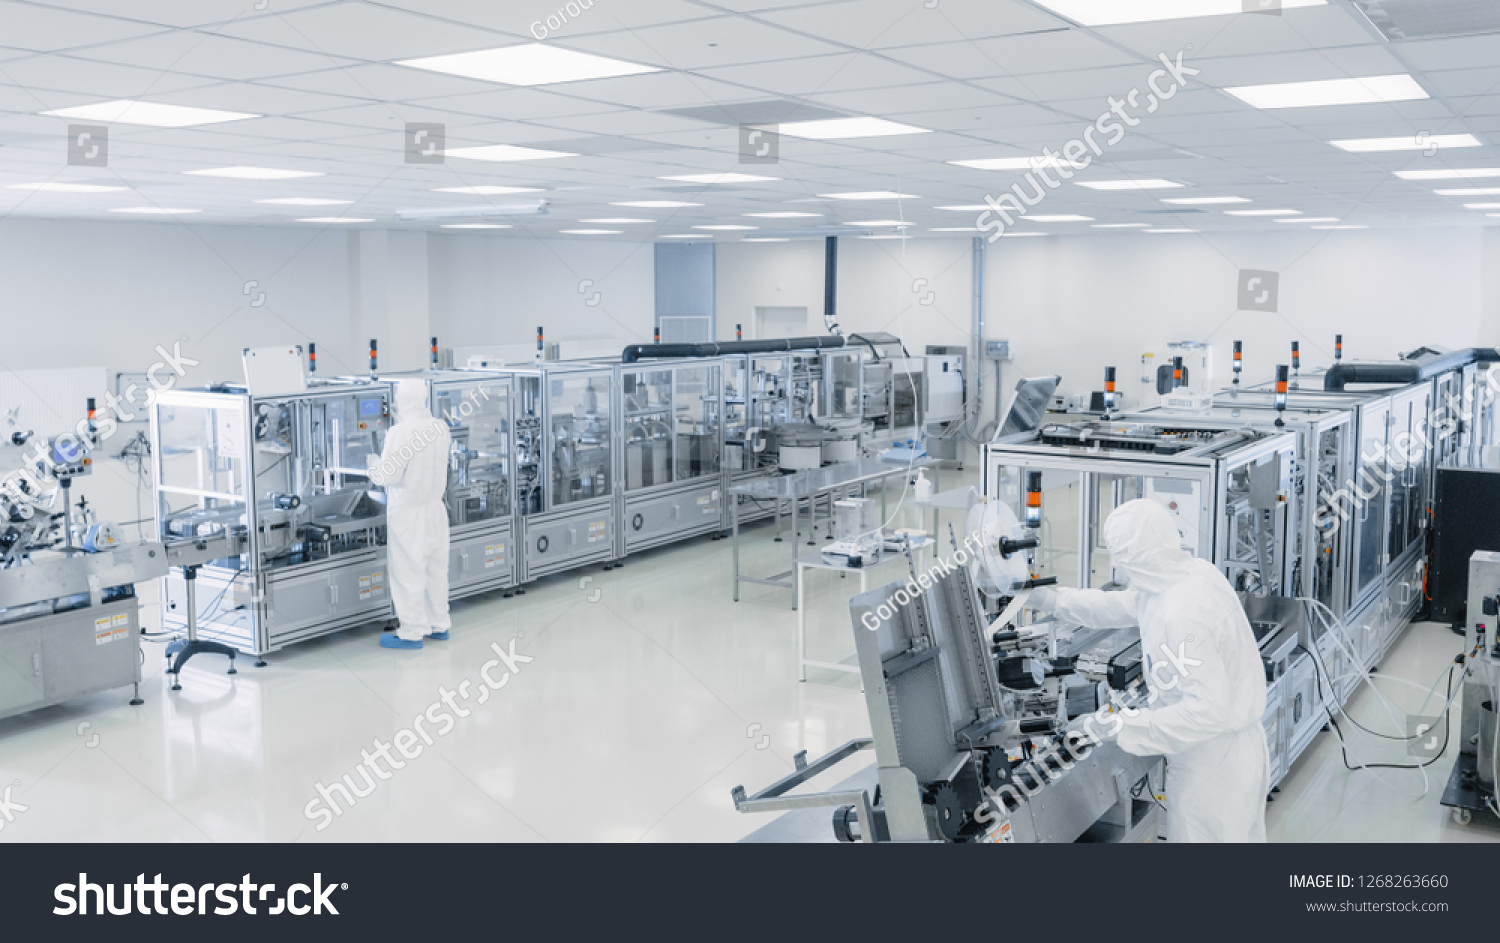 Sterile High Precision Manufacturing Laboratory where Scientists in Protective Coverall's Turn on Machninery, Use Computers and Microscopes, doing Pharmaceutics, Biotechnology Semiconductor Research. #1268263660